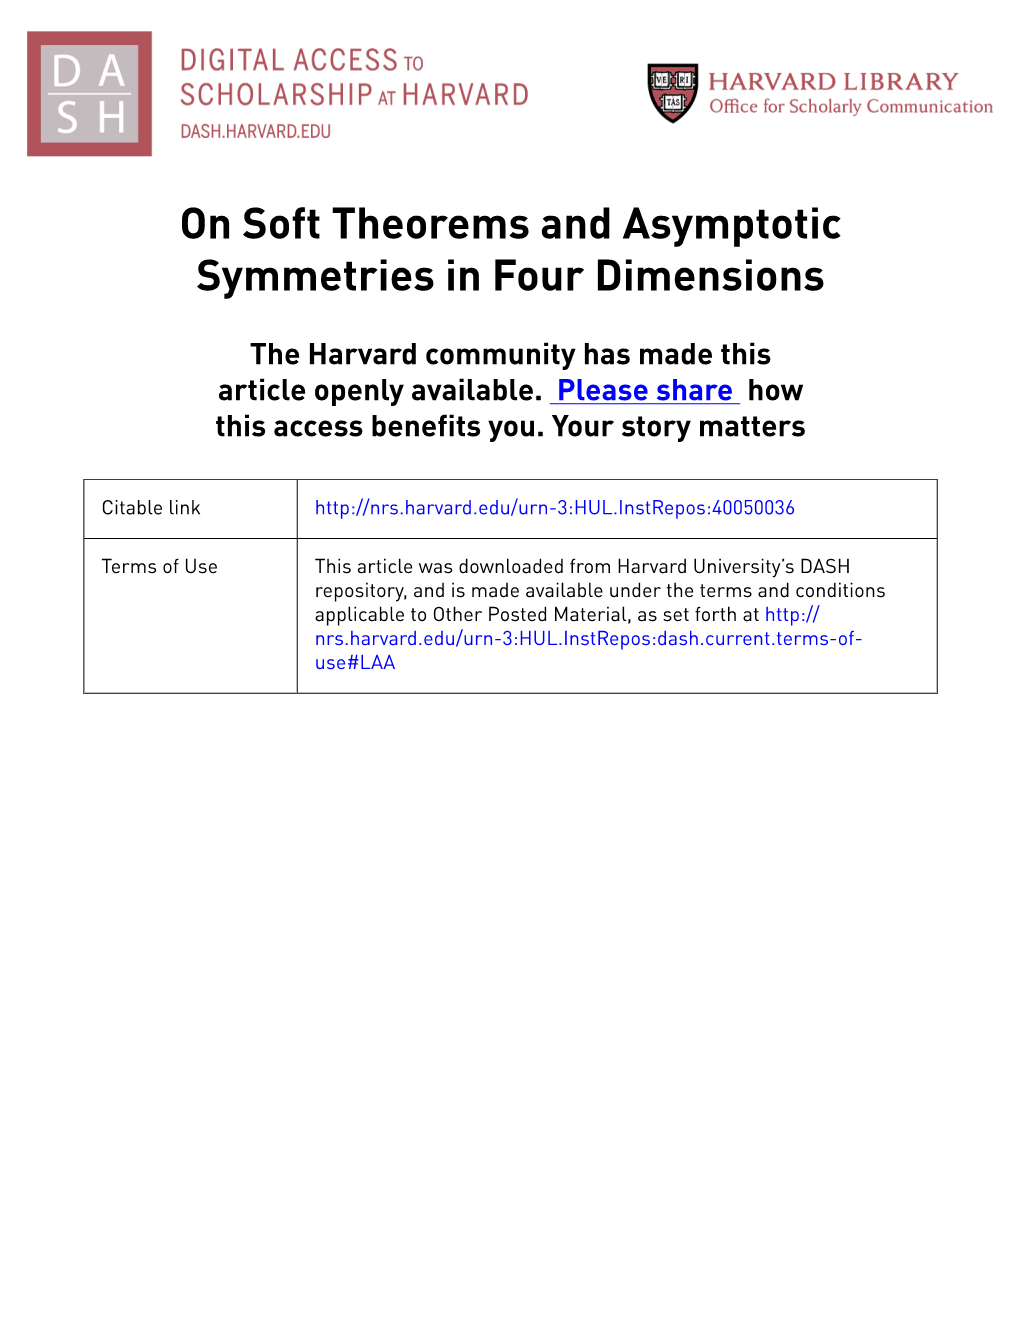 On Soft Theorems and Asymptotic Symmetries in Four Dimensions